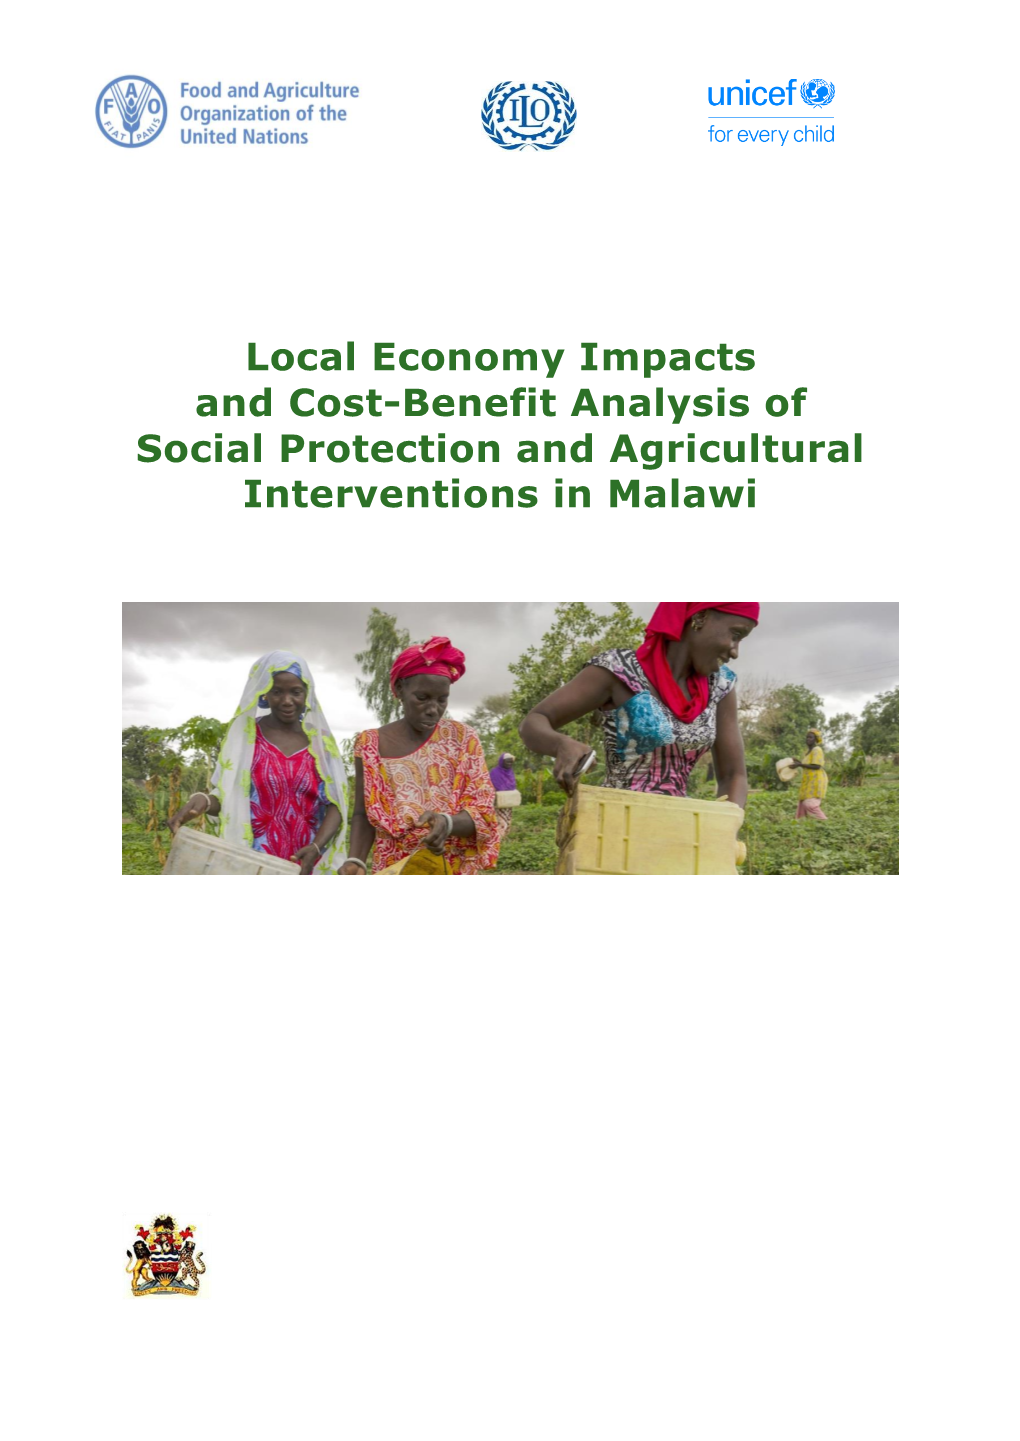 Local Economy Impacts and Cost-Benefit Analysis of Social Protection and Agricultural Interventions in Malawi